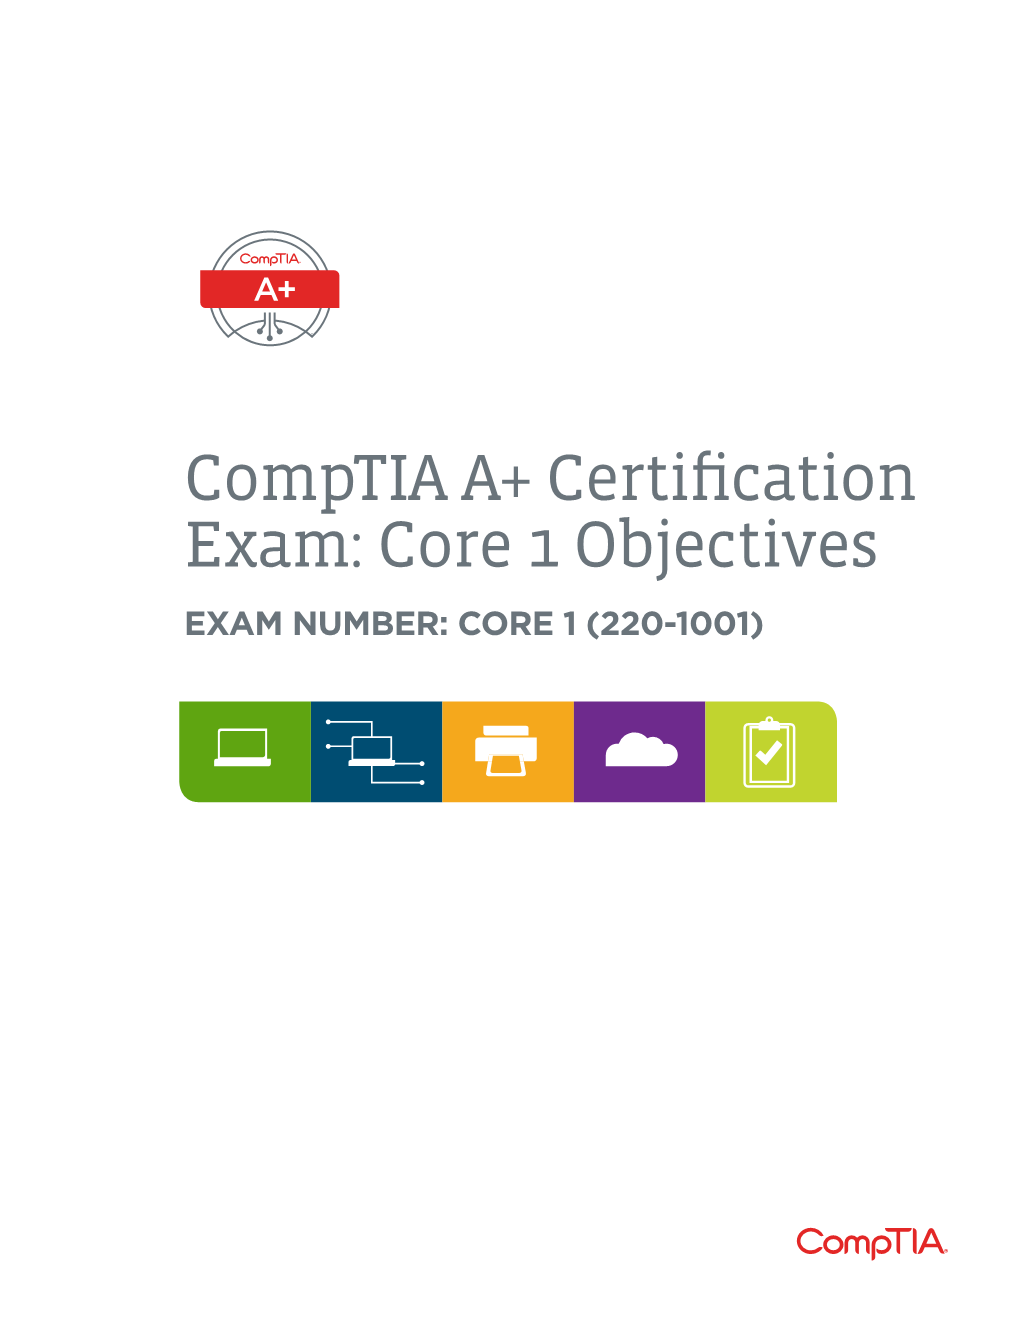 Comptia A+ Certification Exam: Core 1 Objectives EXAM NUMBER: CORE 1 (220-1001) About the Exam